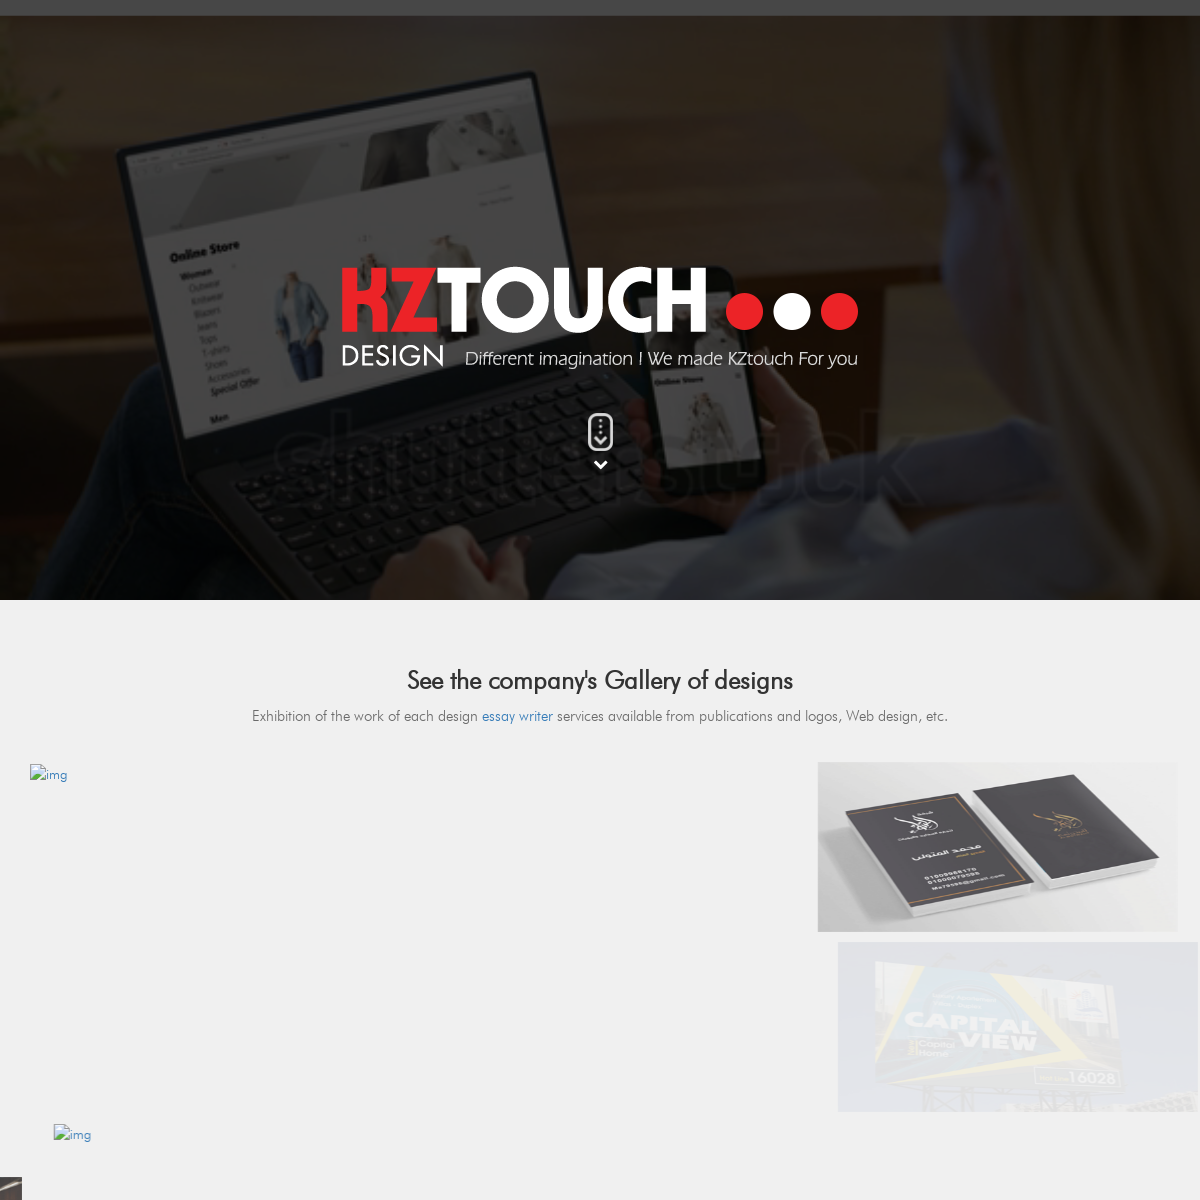 A complete backup of kztouch.com